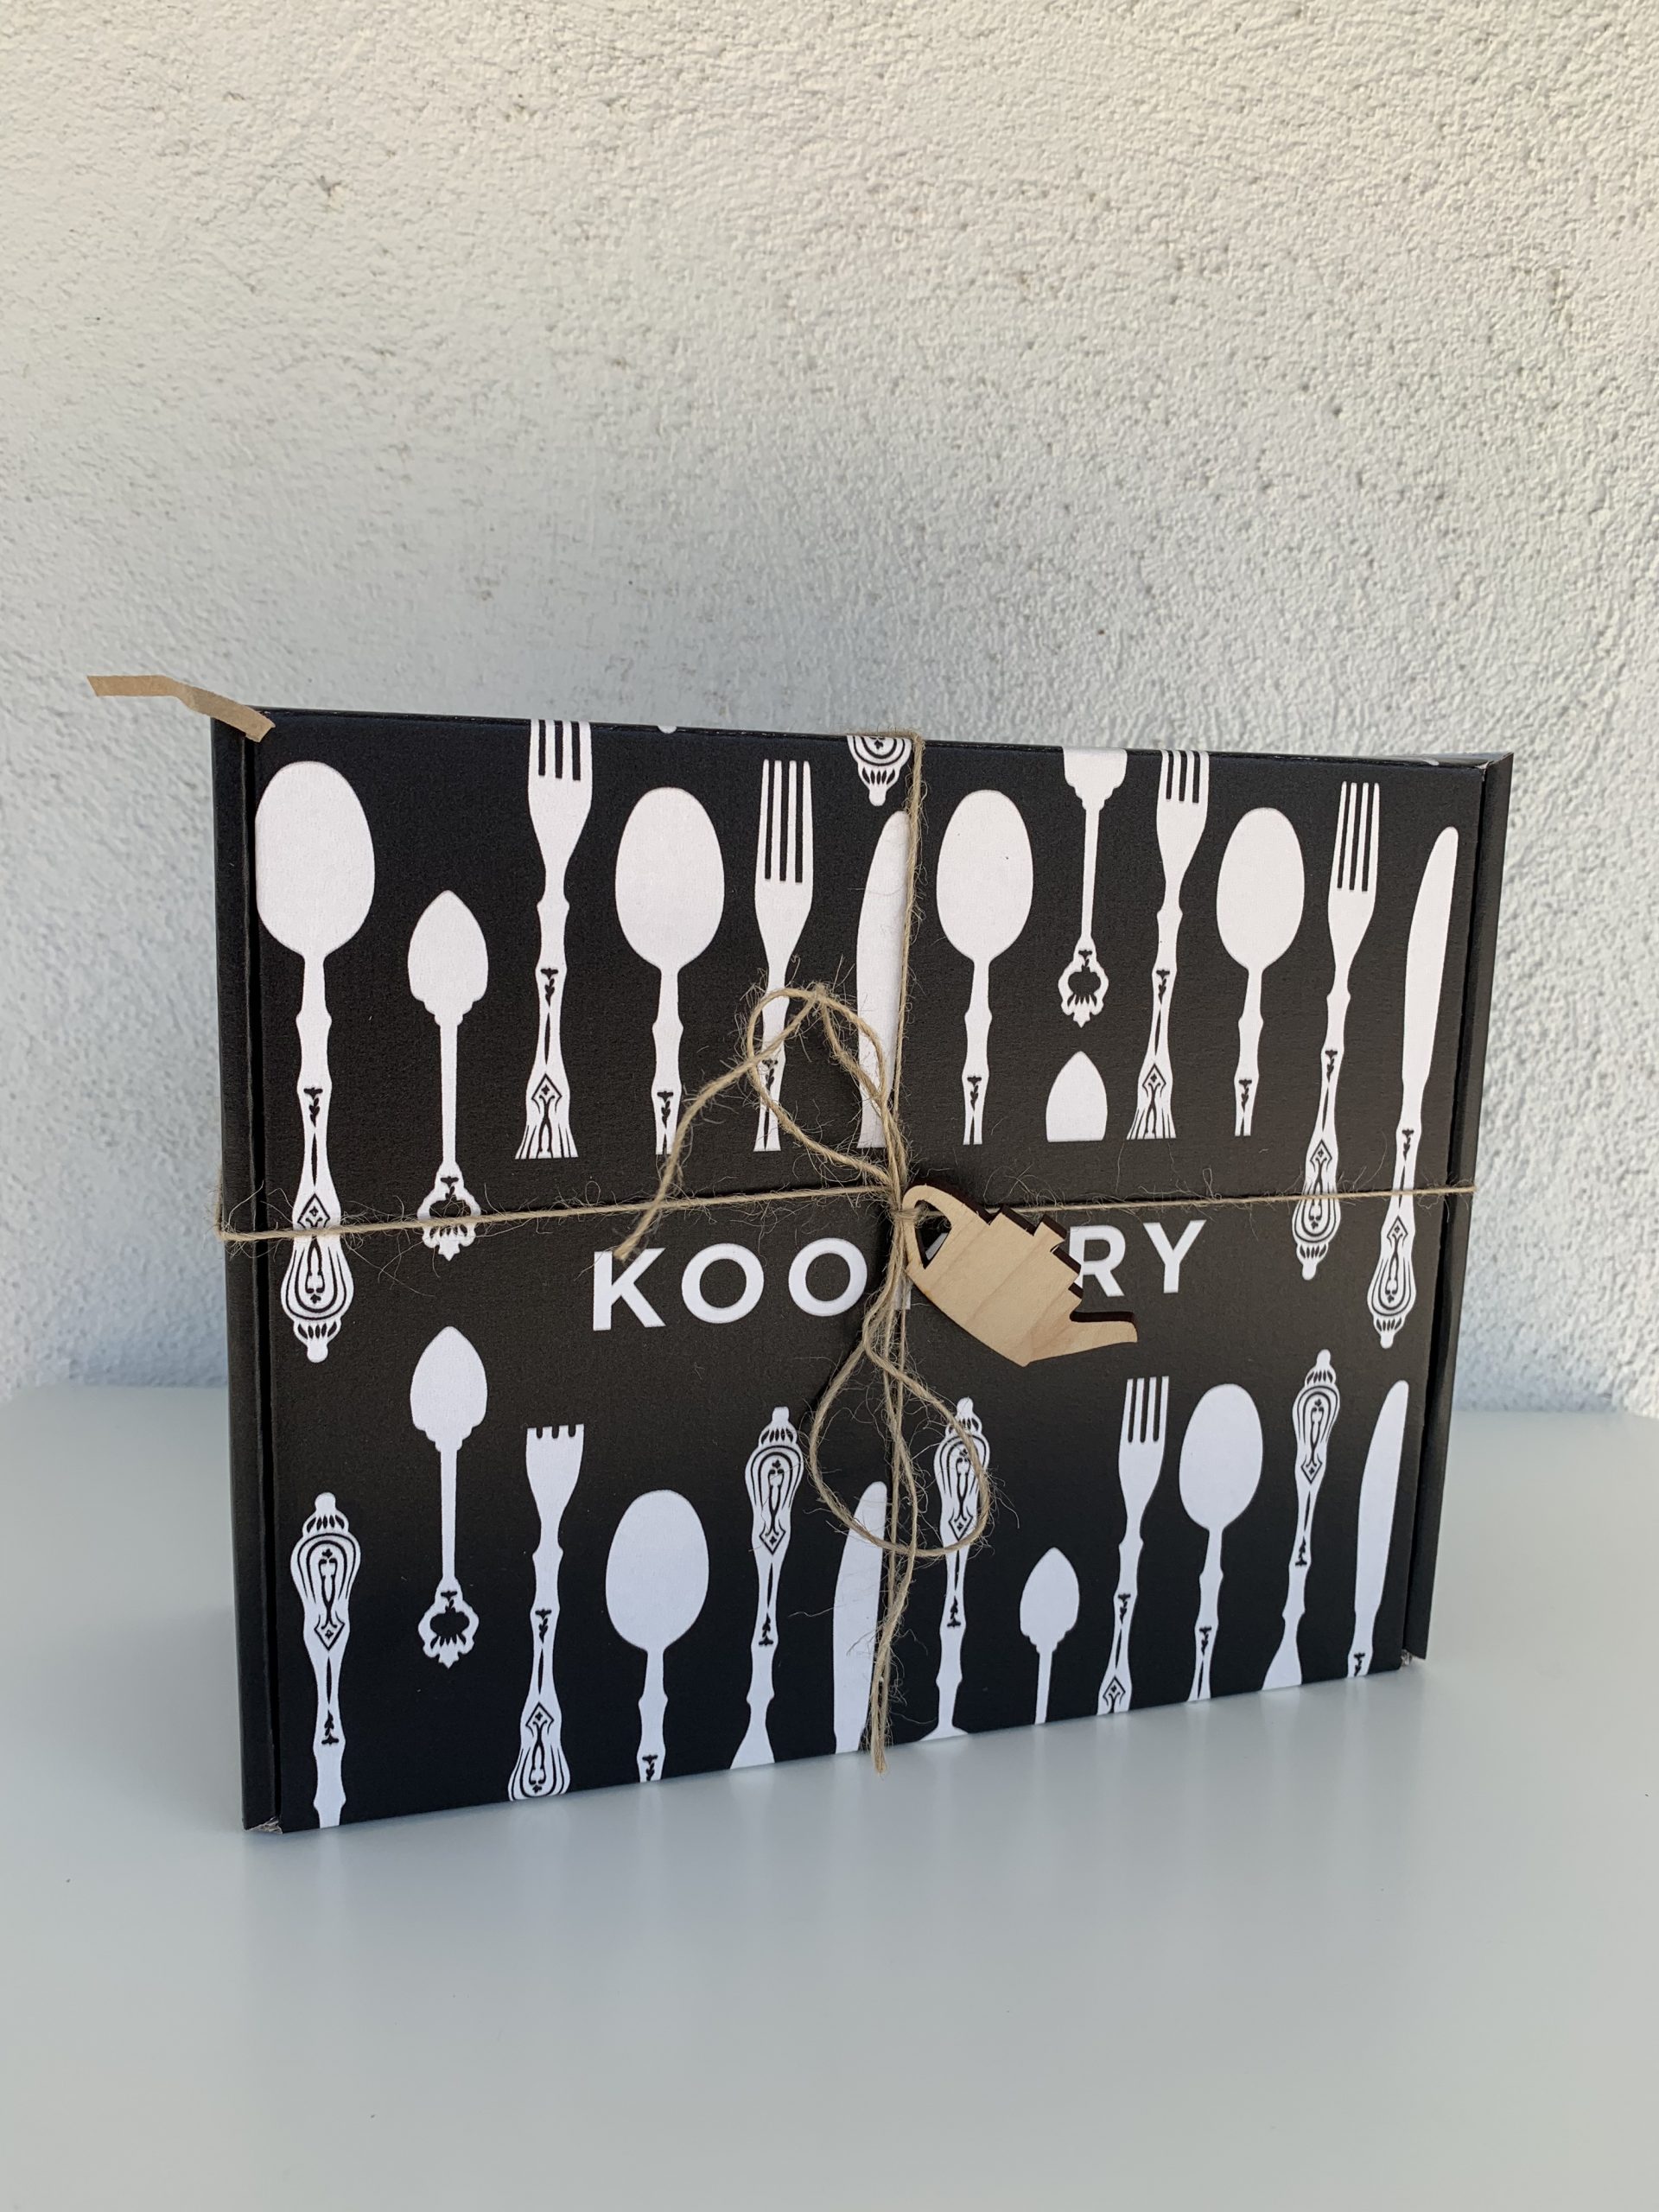 WIN a Kookery gift box to send to that friend that you’d love to share a cup of tea with